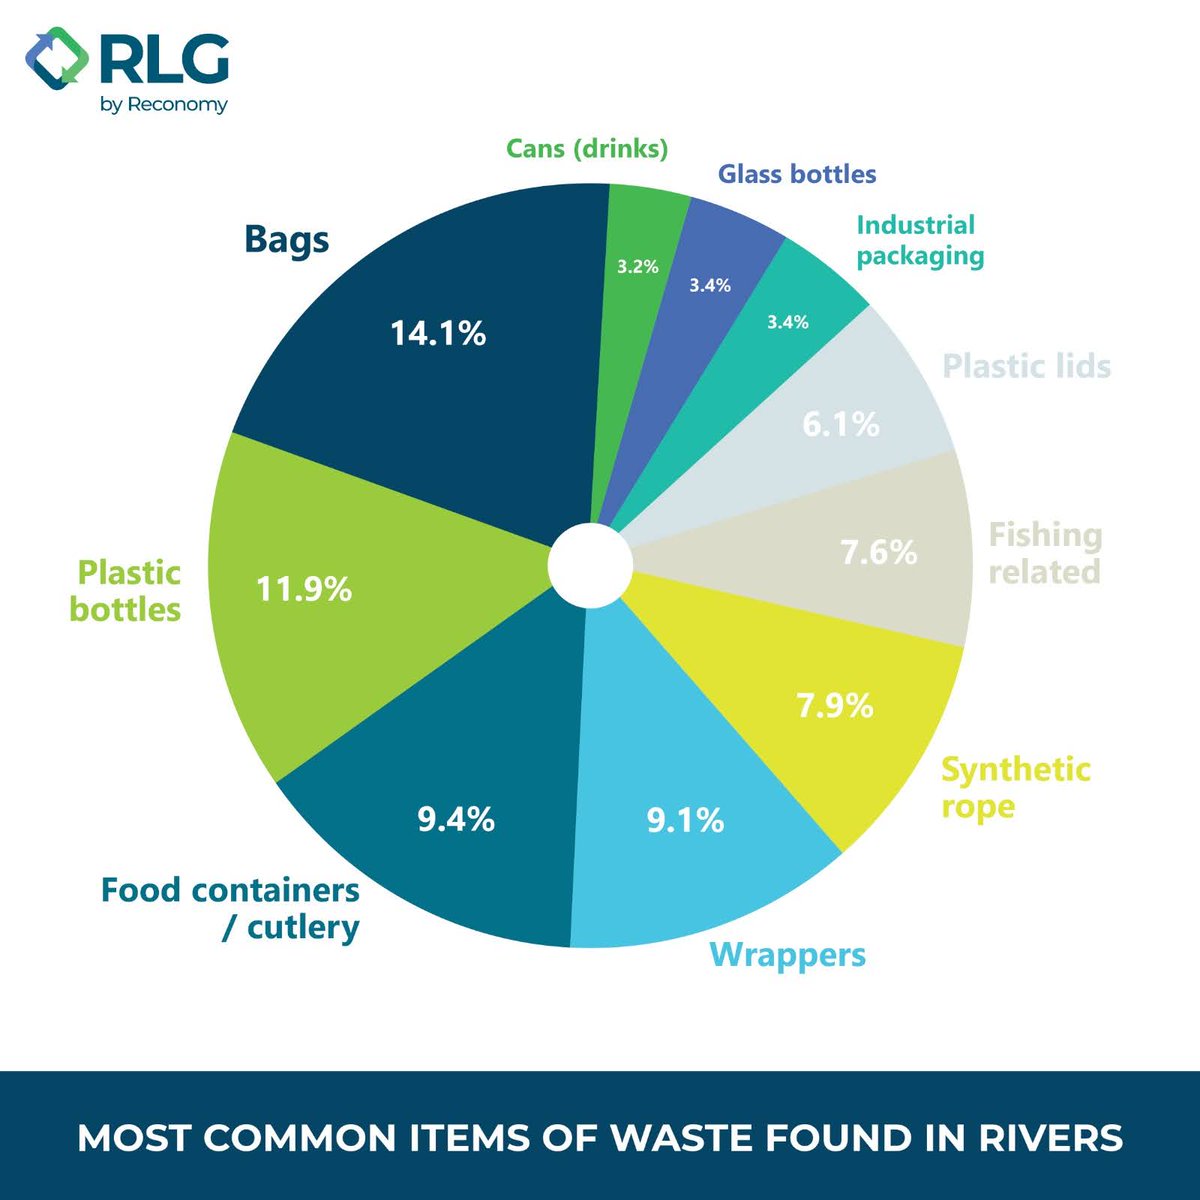 Rivers should be thriving ecosystems, not waste conduits. Let's unite to protect these precious waterways and the diverse life they sustain. #Waste #Recycle #SustainableFuture #EcoFriendly #Rivers #Plastic #PlasticWaste